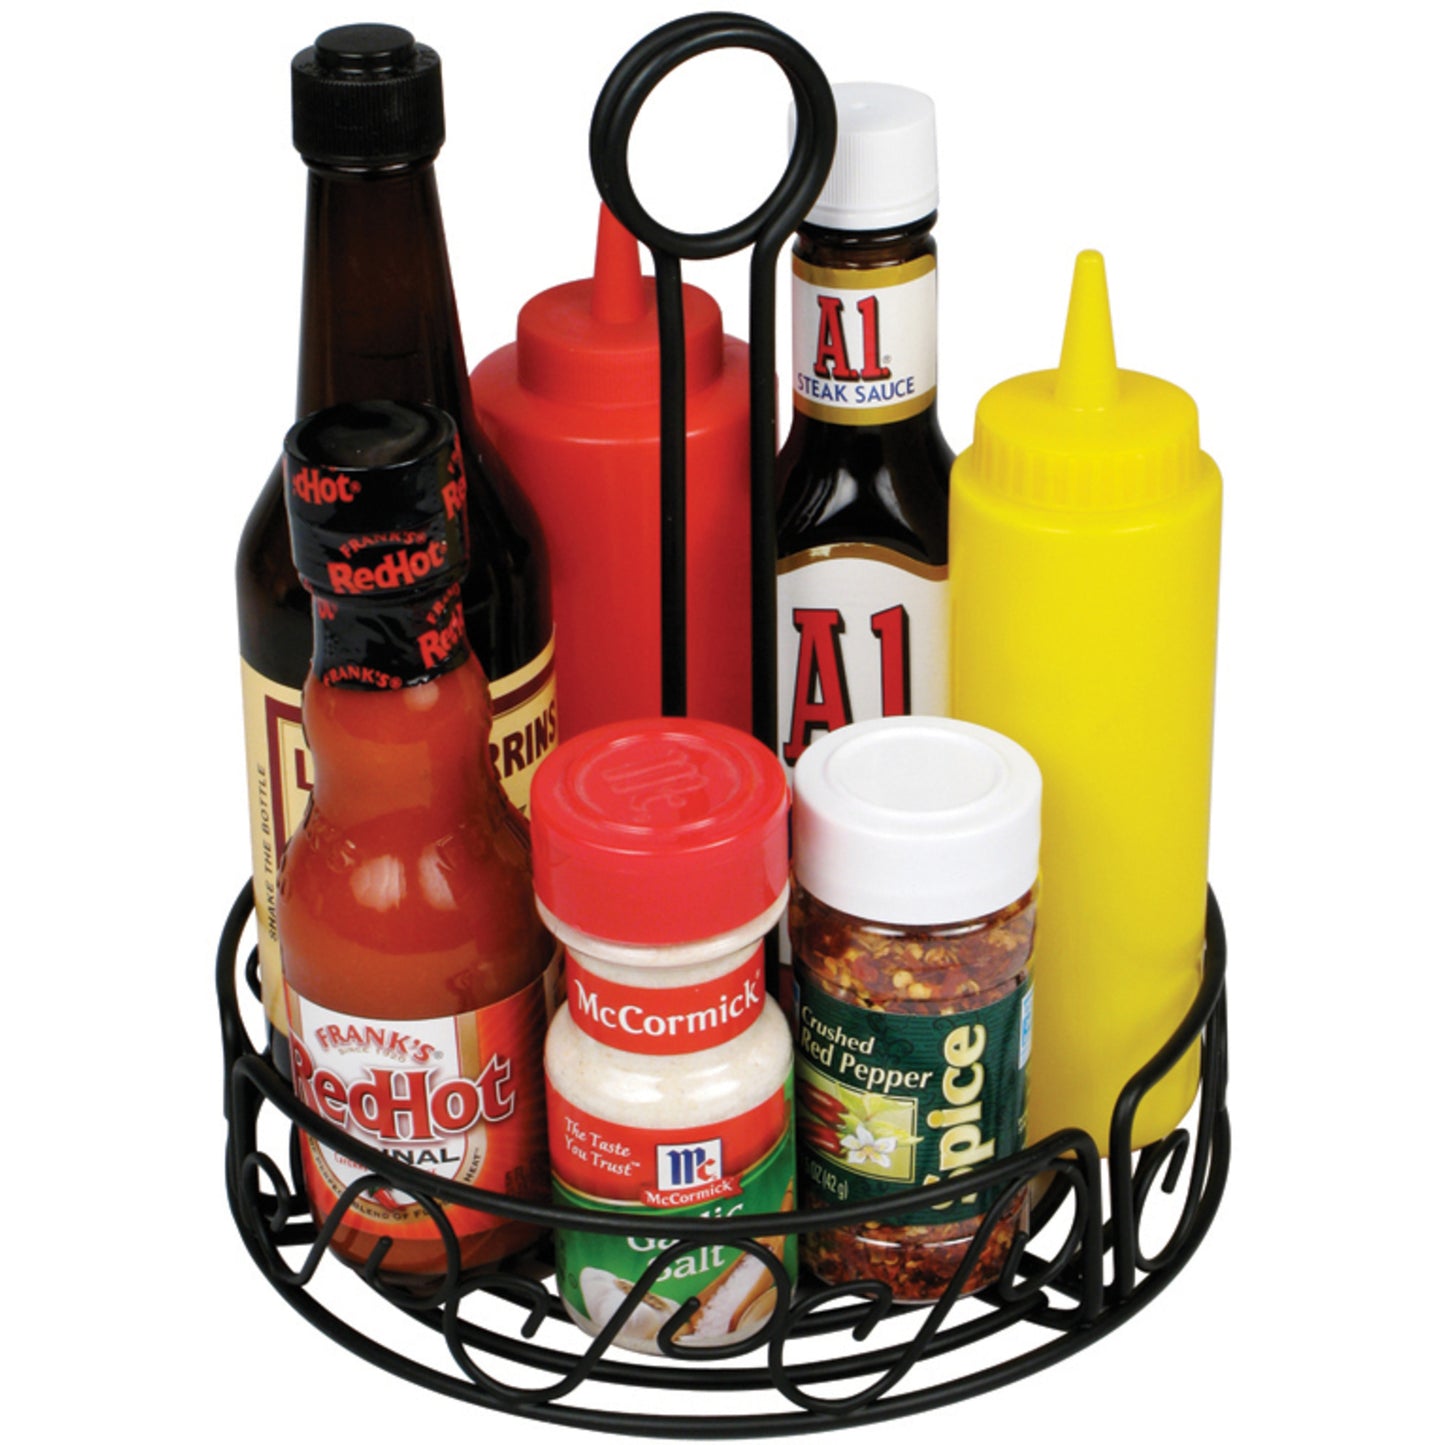 6-1/4" Round Wire Condiment Caddy with Handle